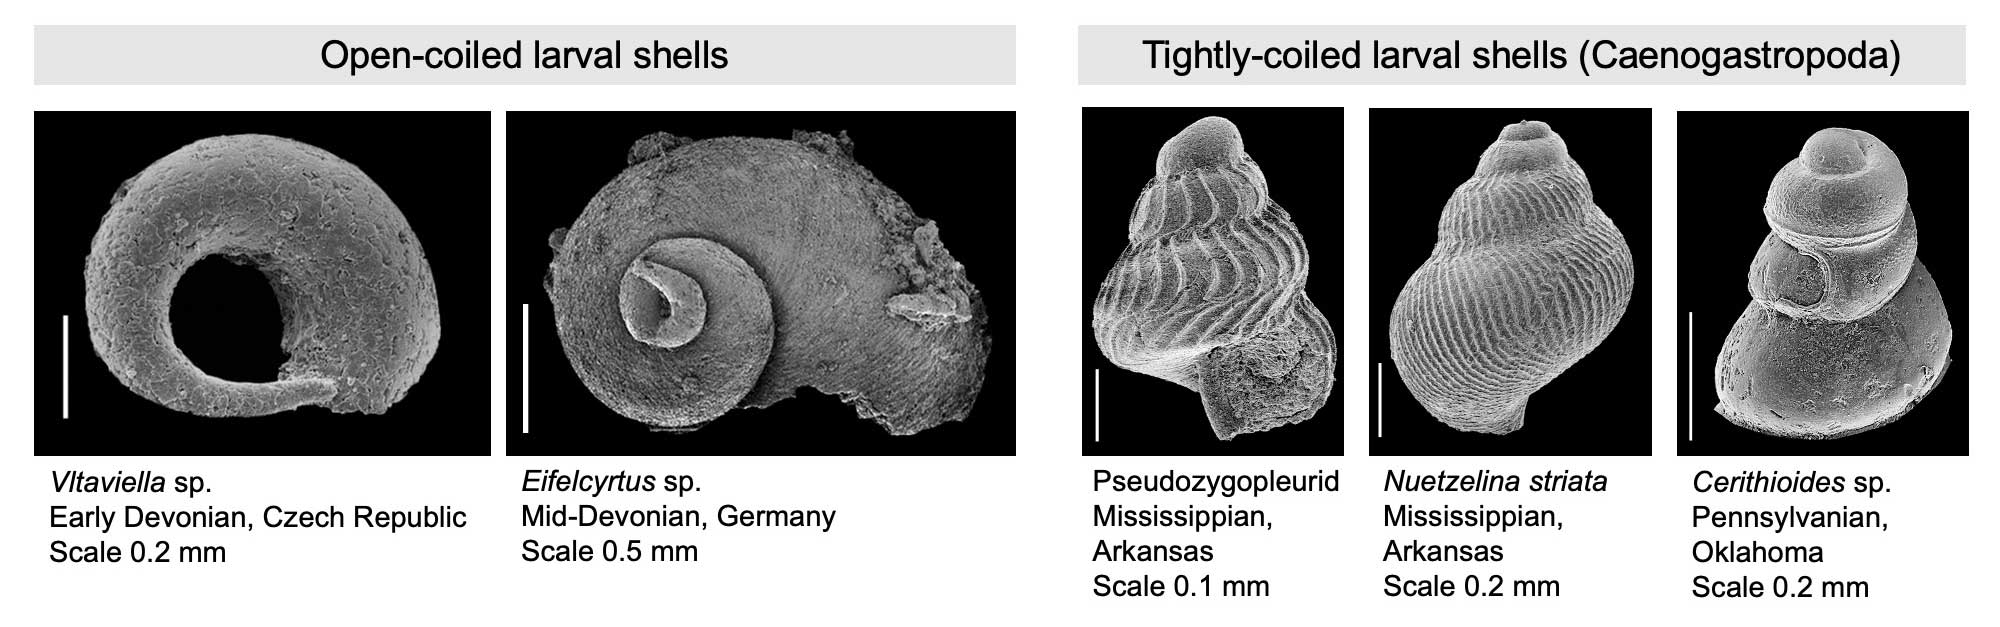 Examples of different types of Paleozoic gastropod protoconchs.